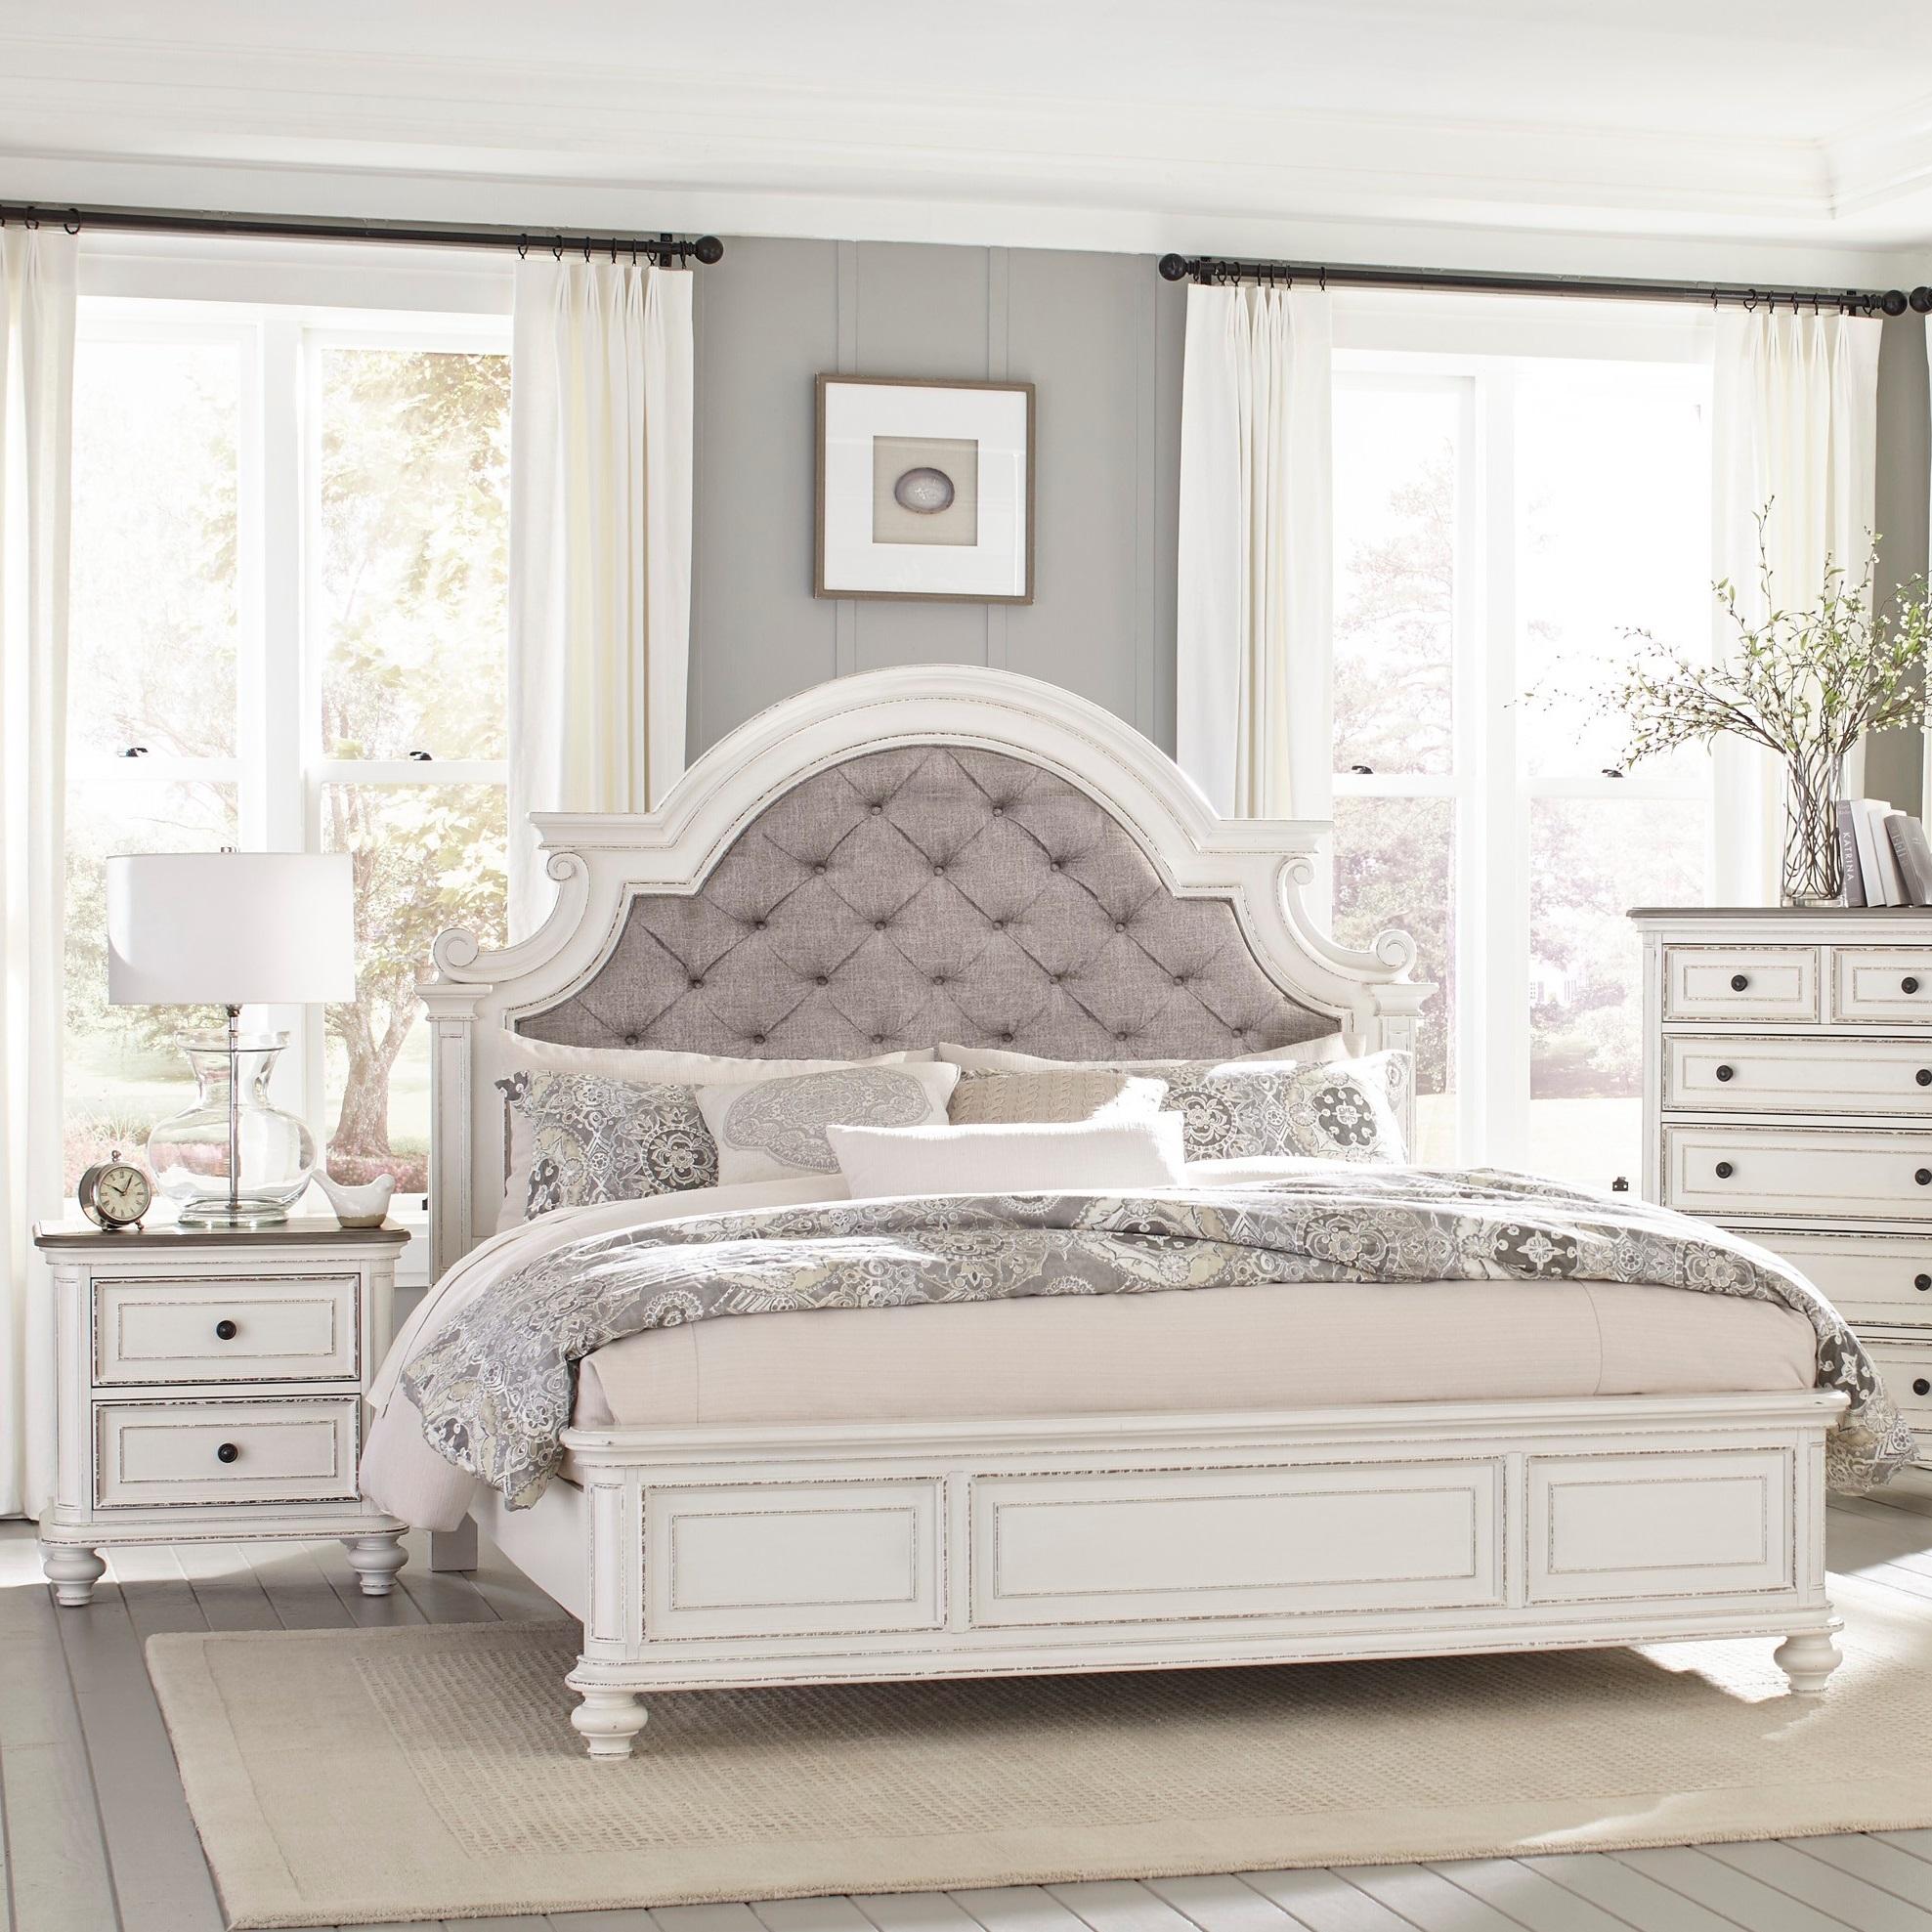 Classic Bedroom Set 1624KW-1CK-3PC Baylesford 1624KW-1CK-3PC in Antique White Polyester